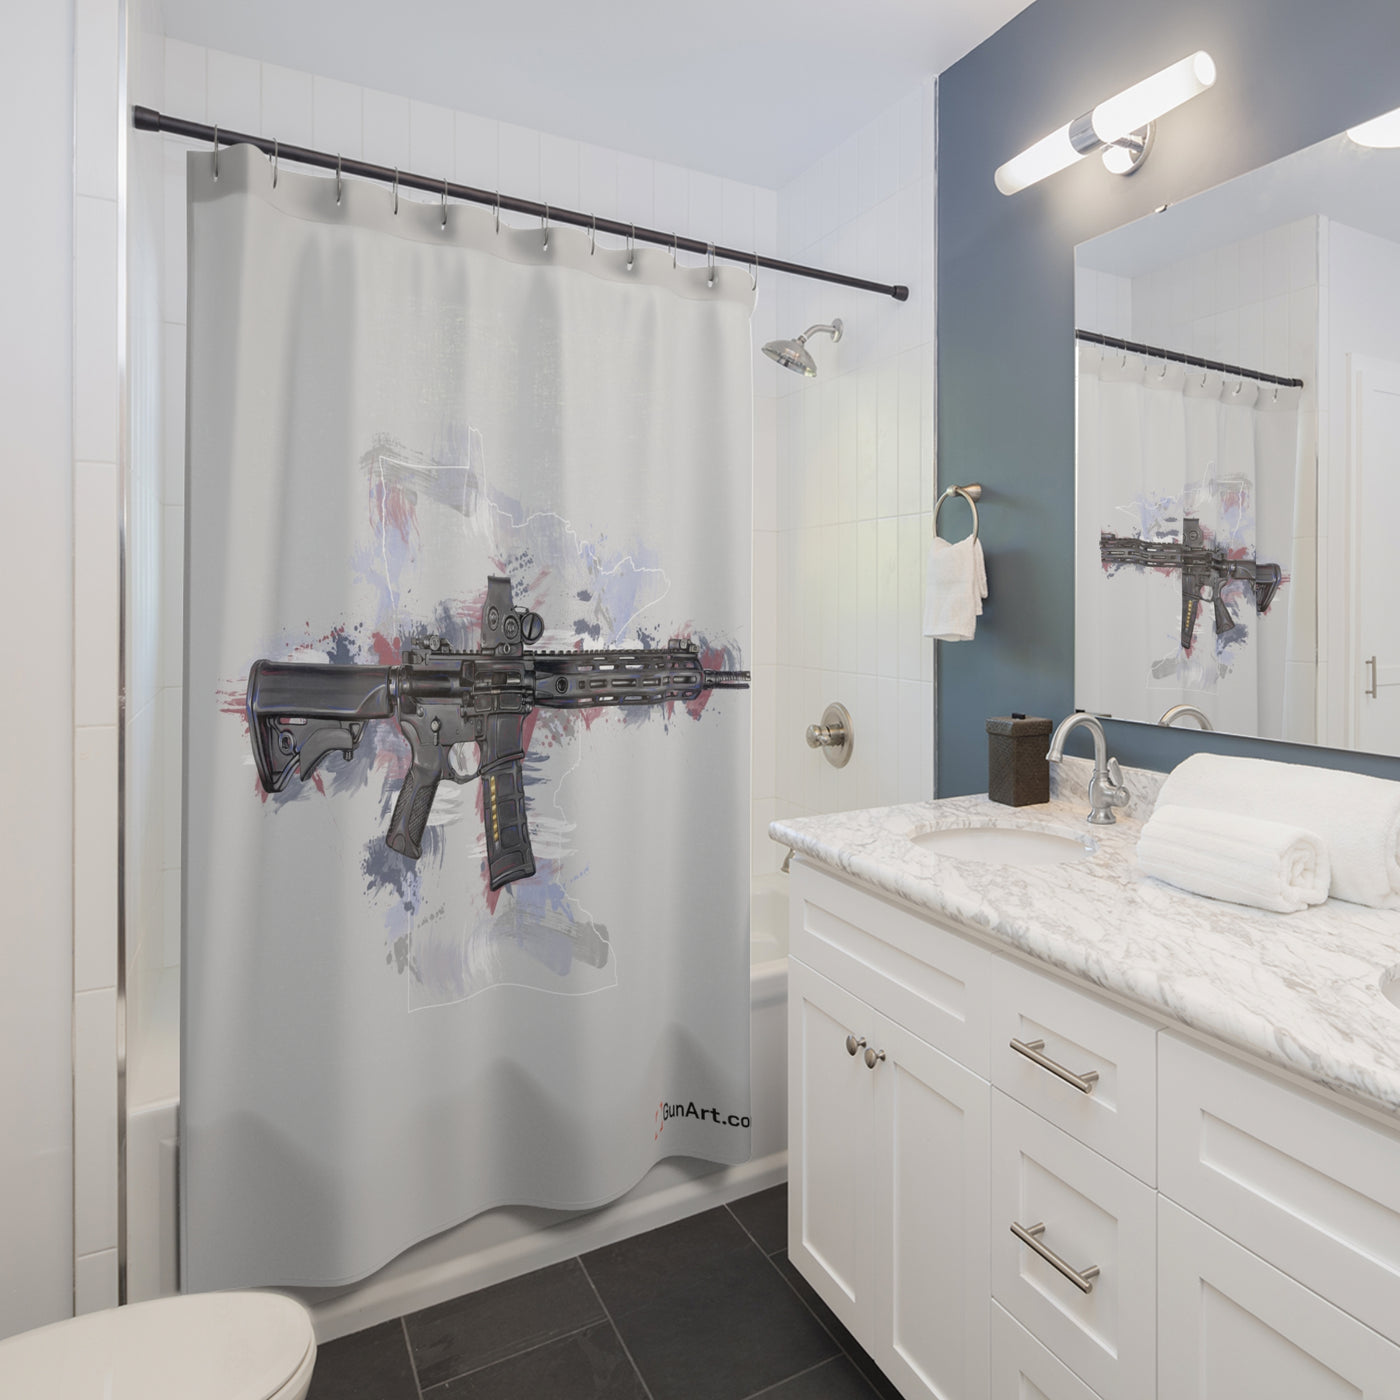 Defending Freedom - Minnesota - AR-15 State Shower Curtains - White State